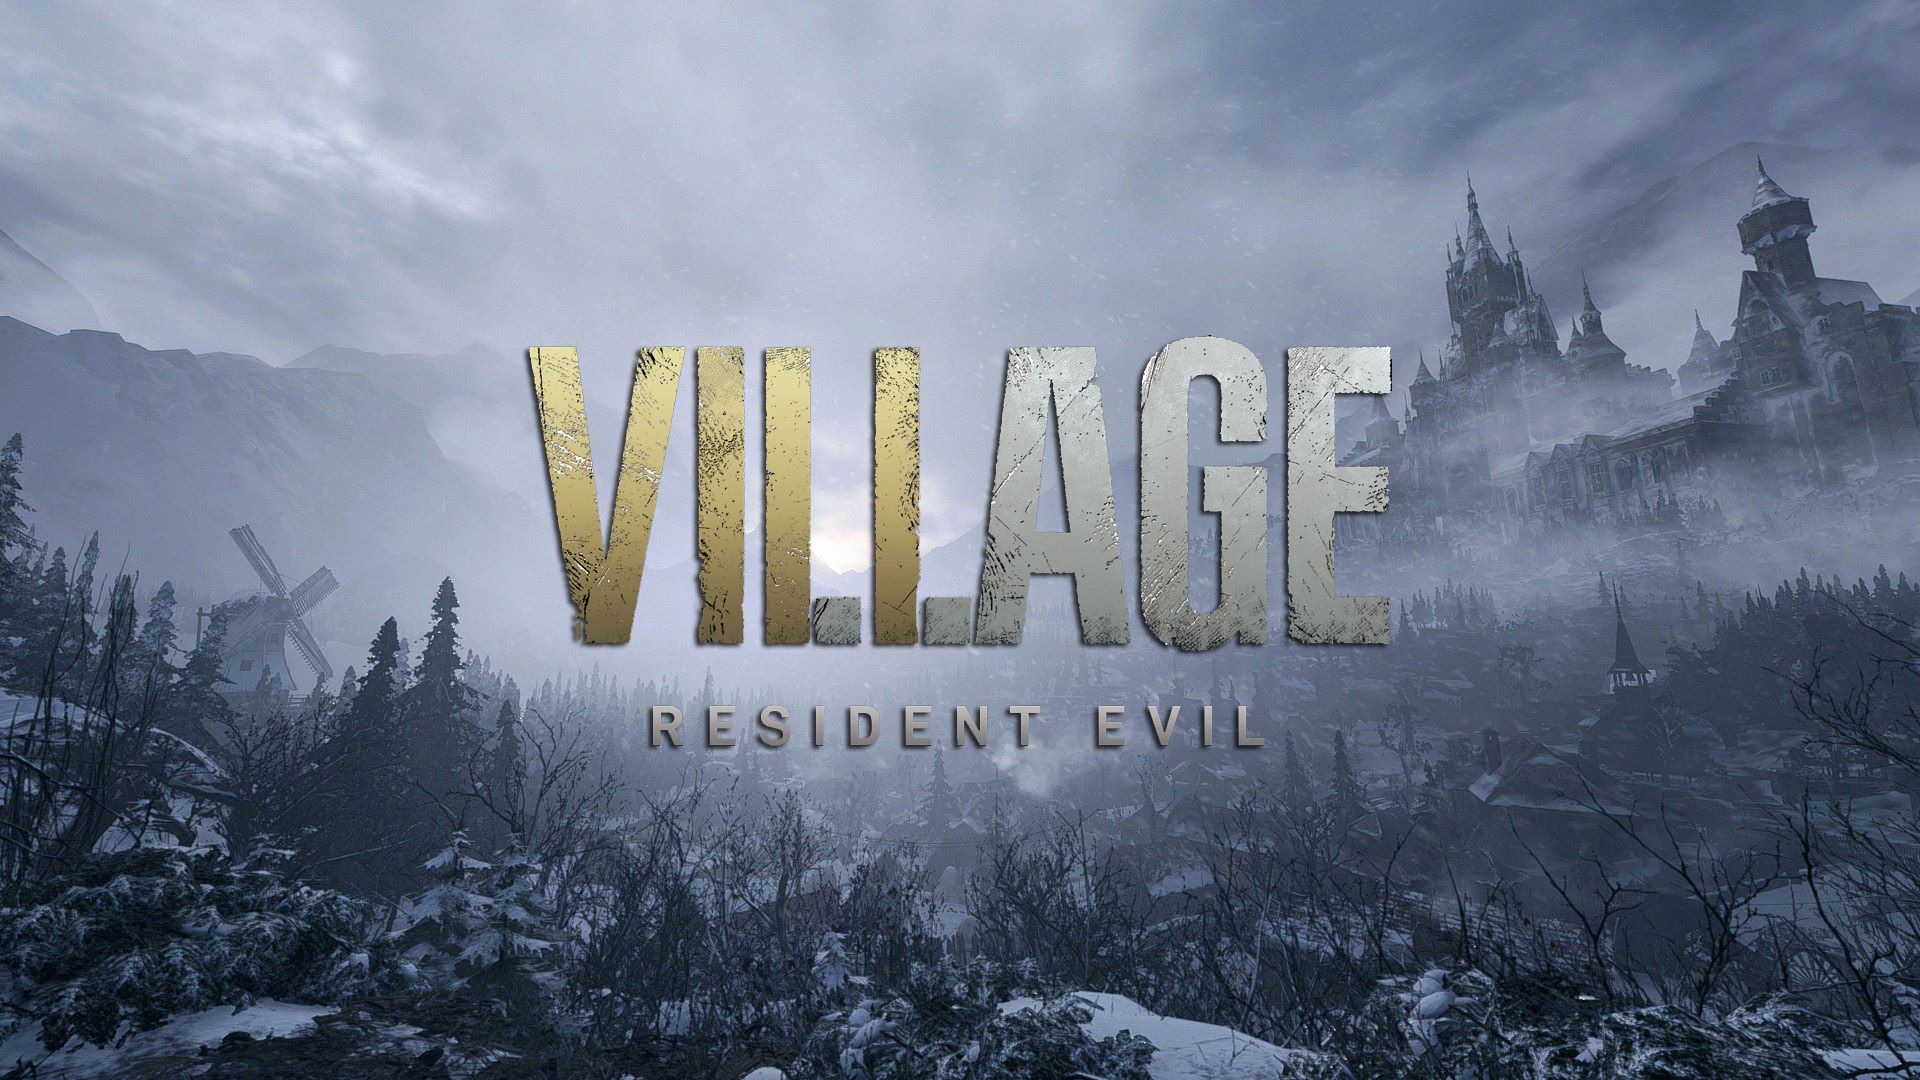 The stories are true - the pirate version of Resident Evil Village